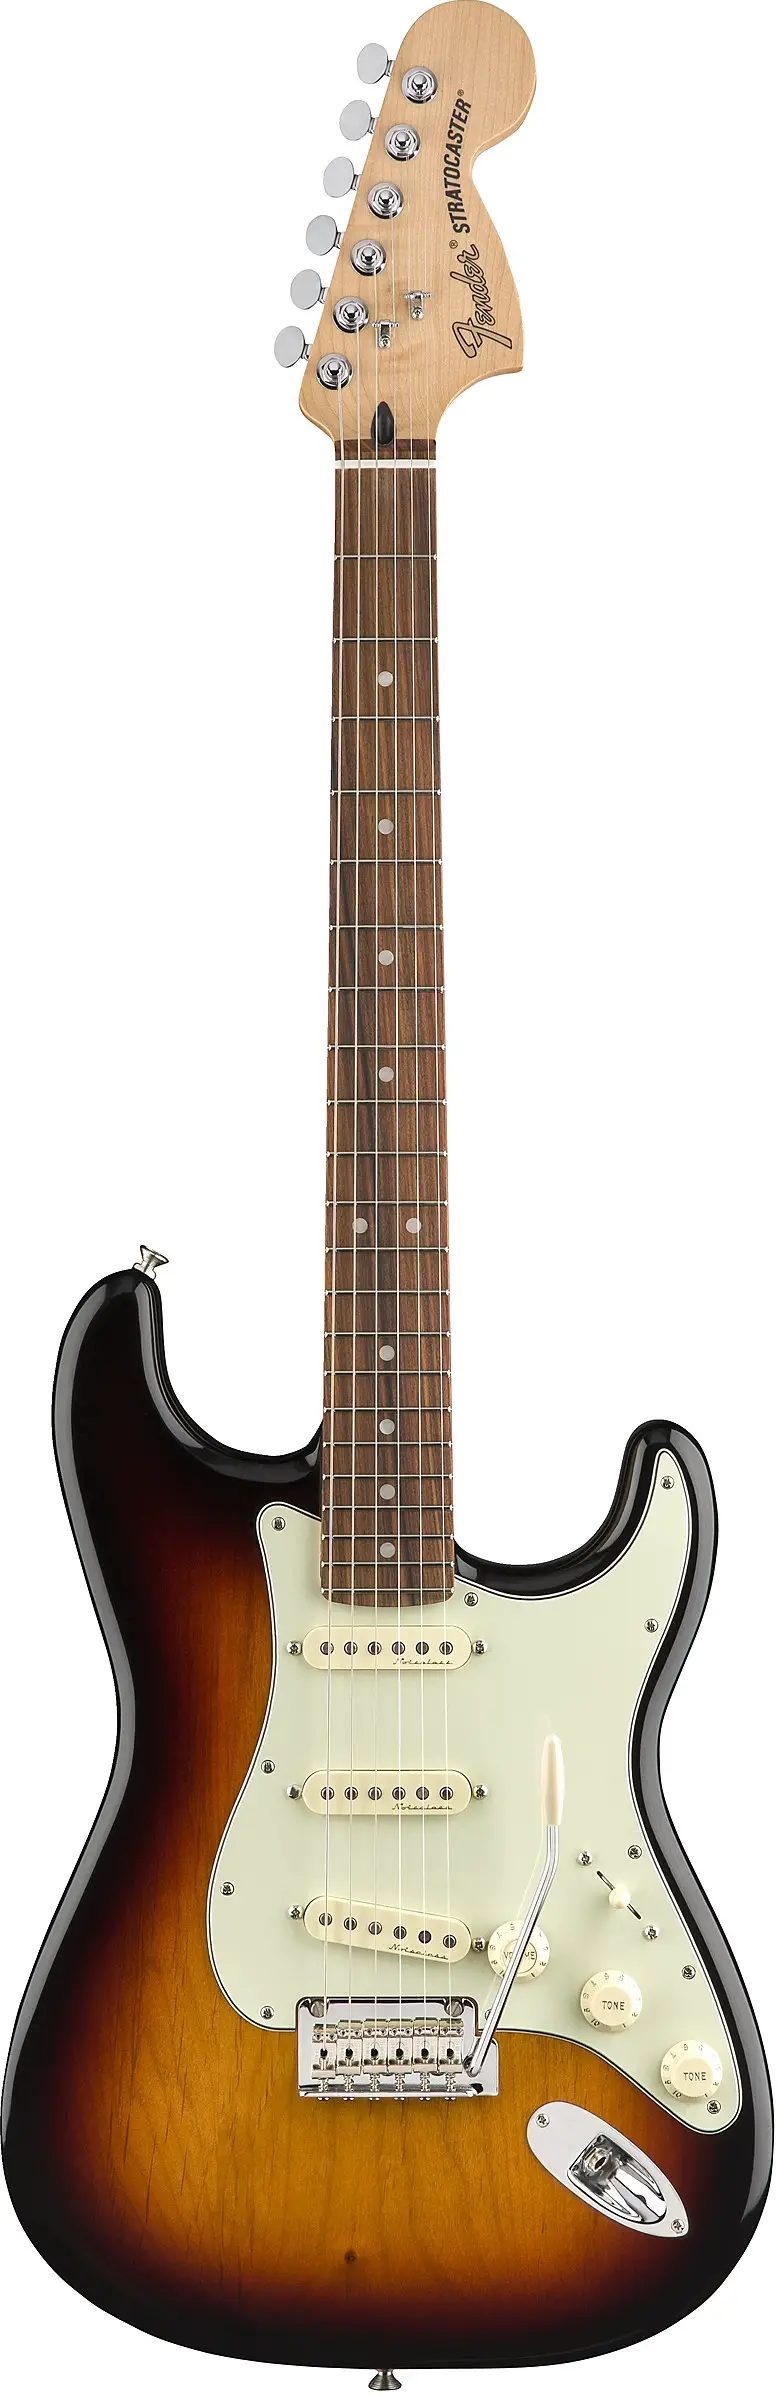 Deluxe Roadhouse Strat by Fender